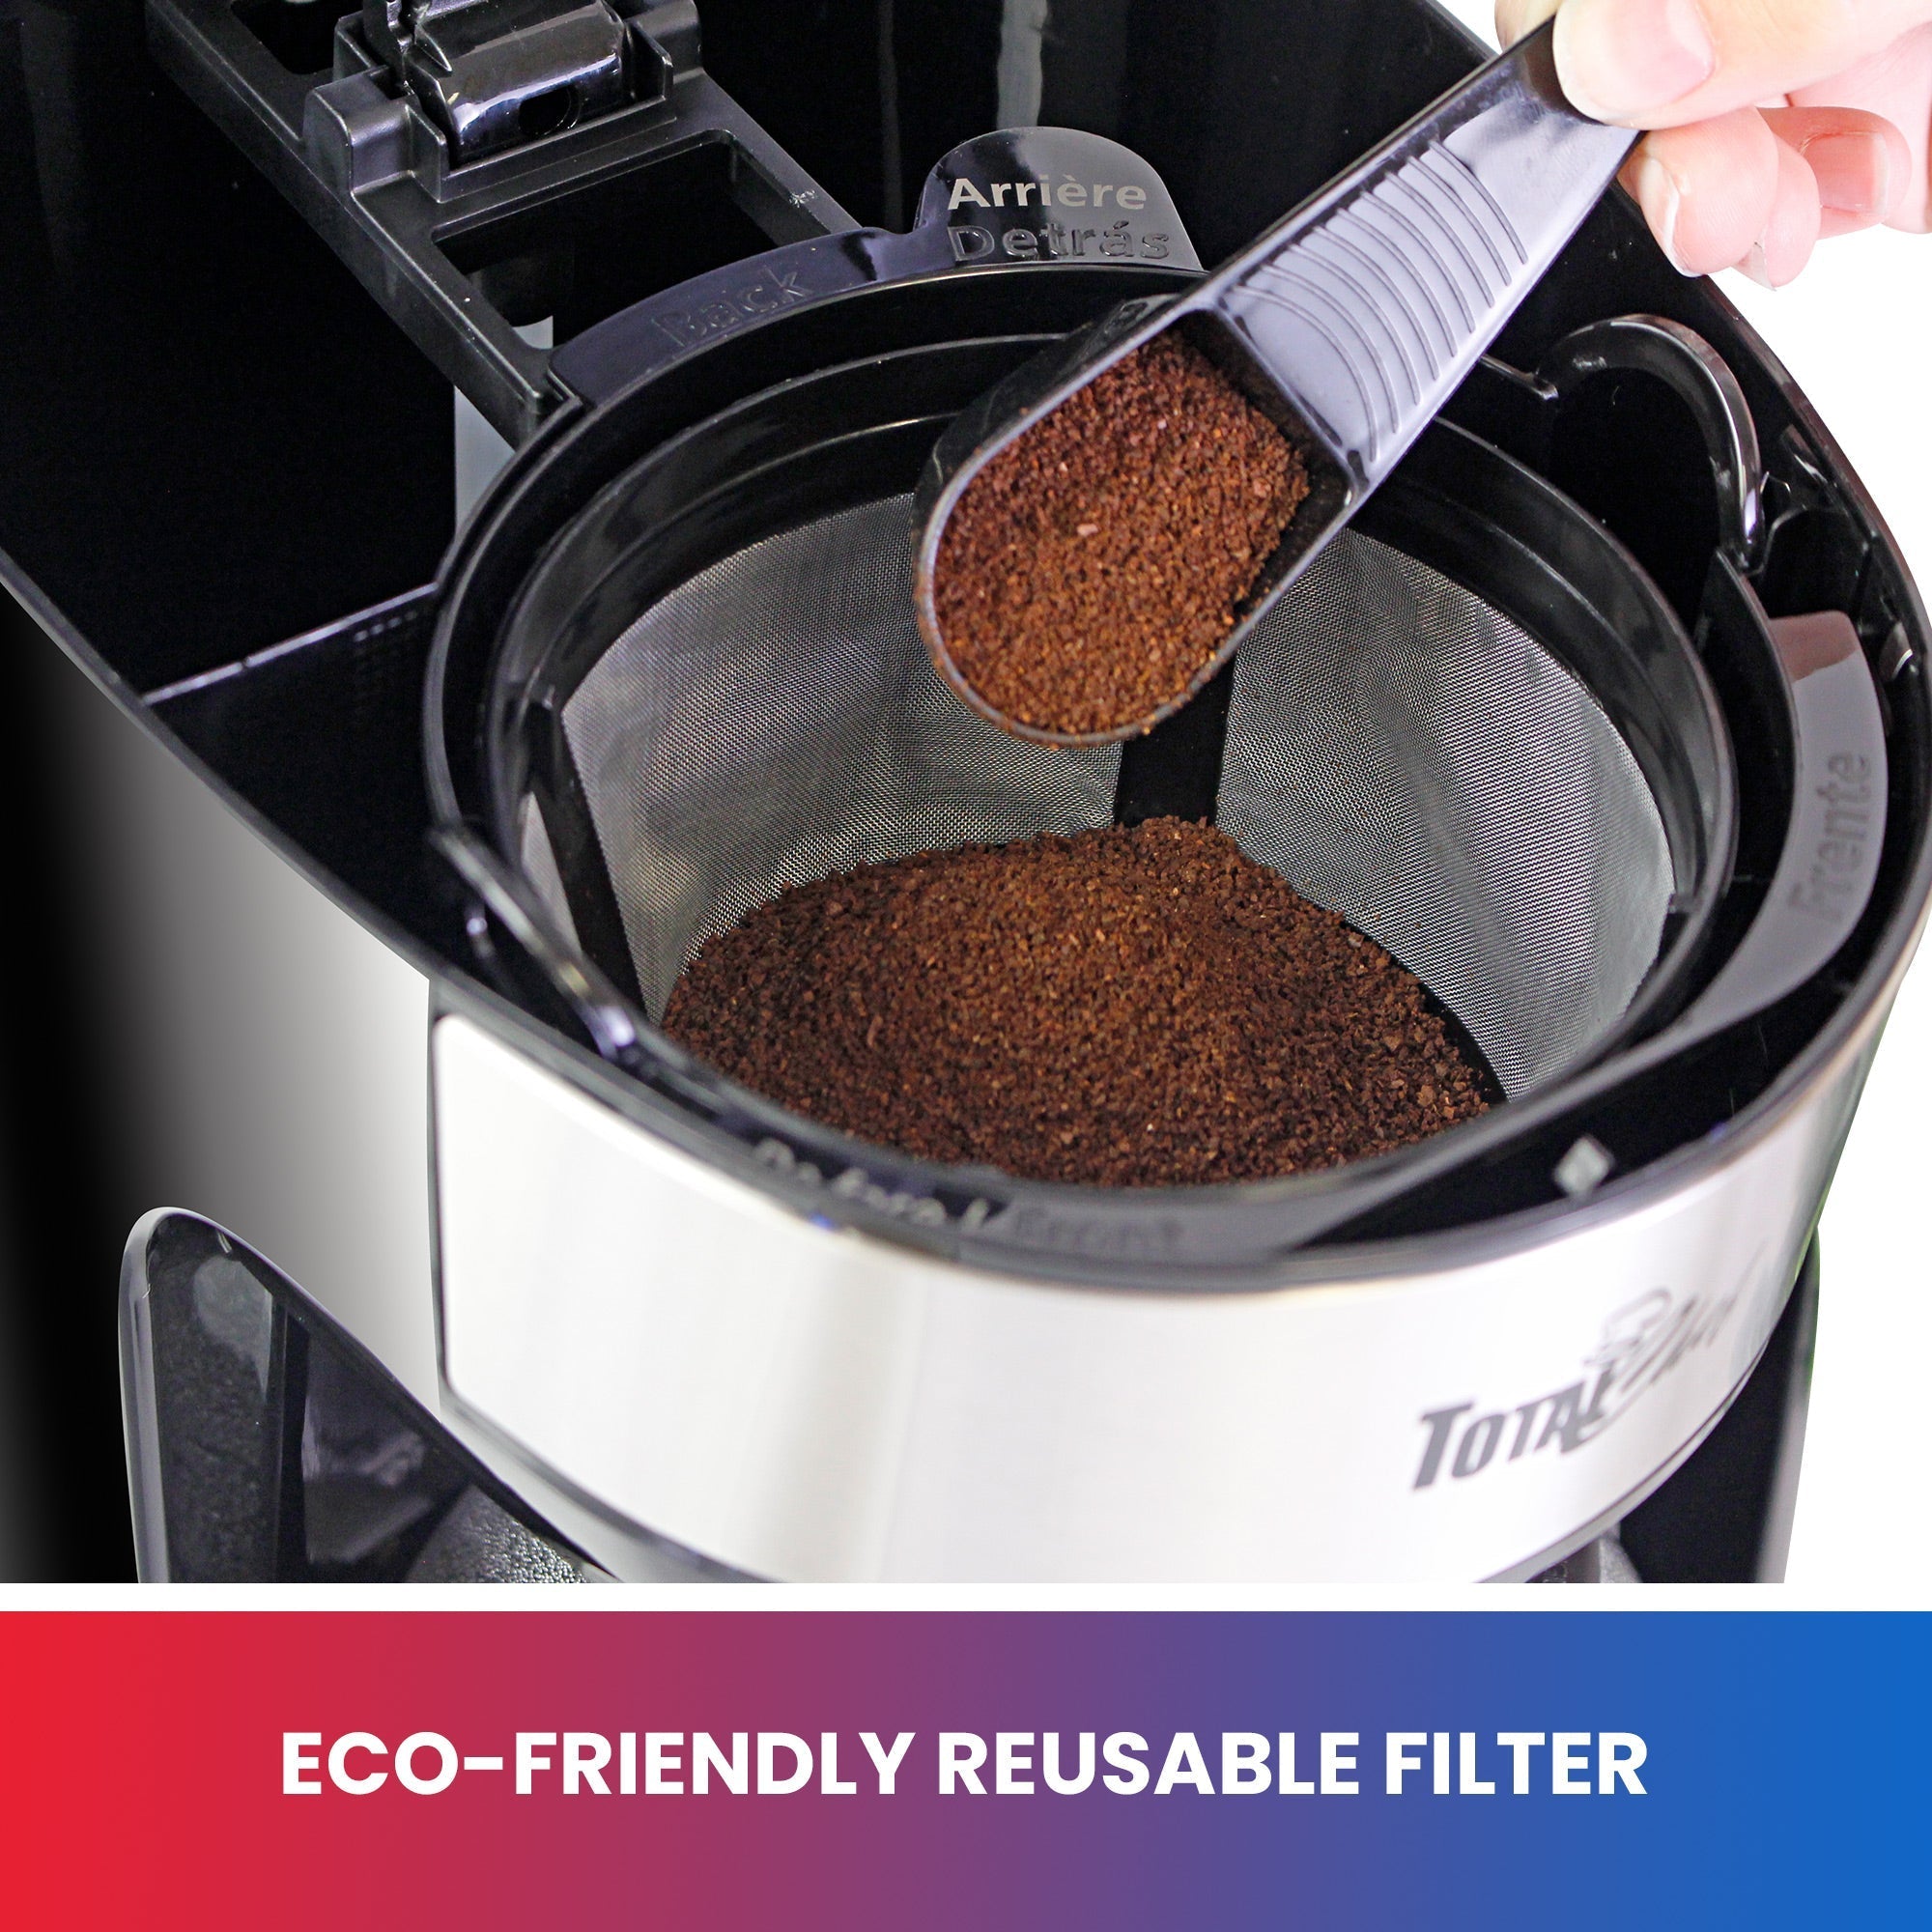 Closeup image of coffee maker viewed from above with a person's hand scoping ground coffee into the reusable basket filter. Text below reads, "Eco-friendly reusable filter" 